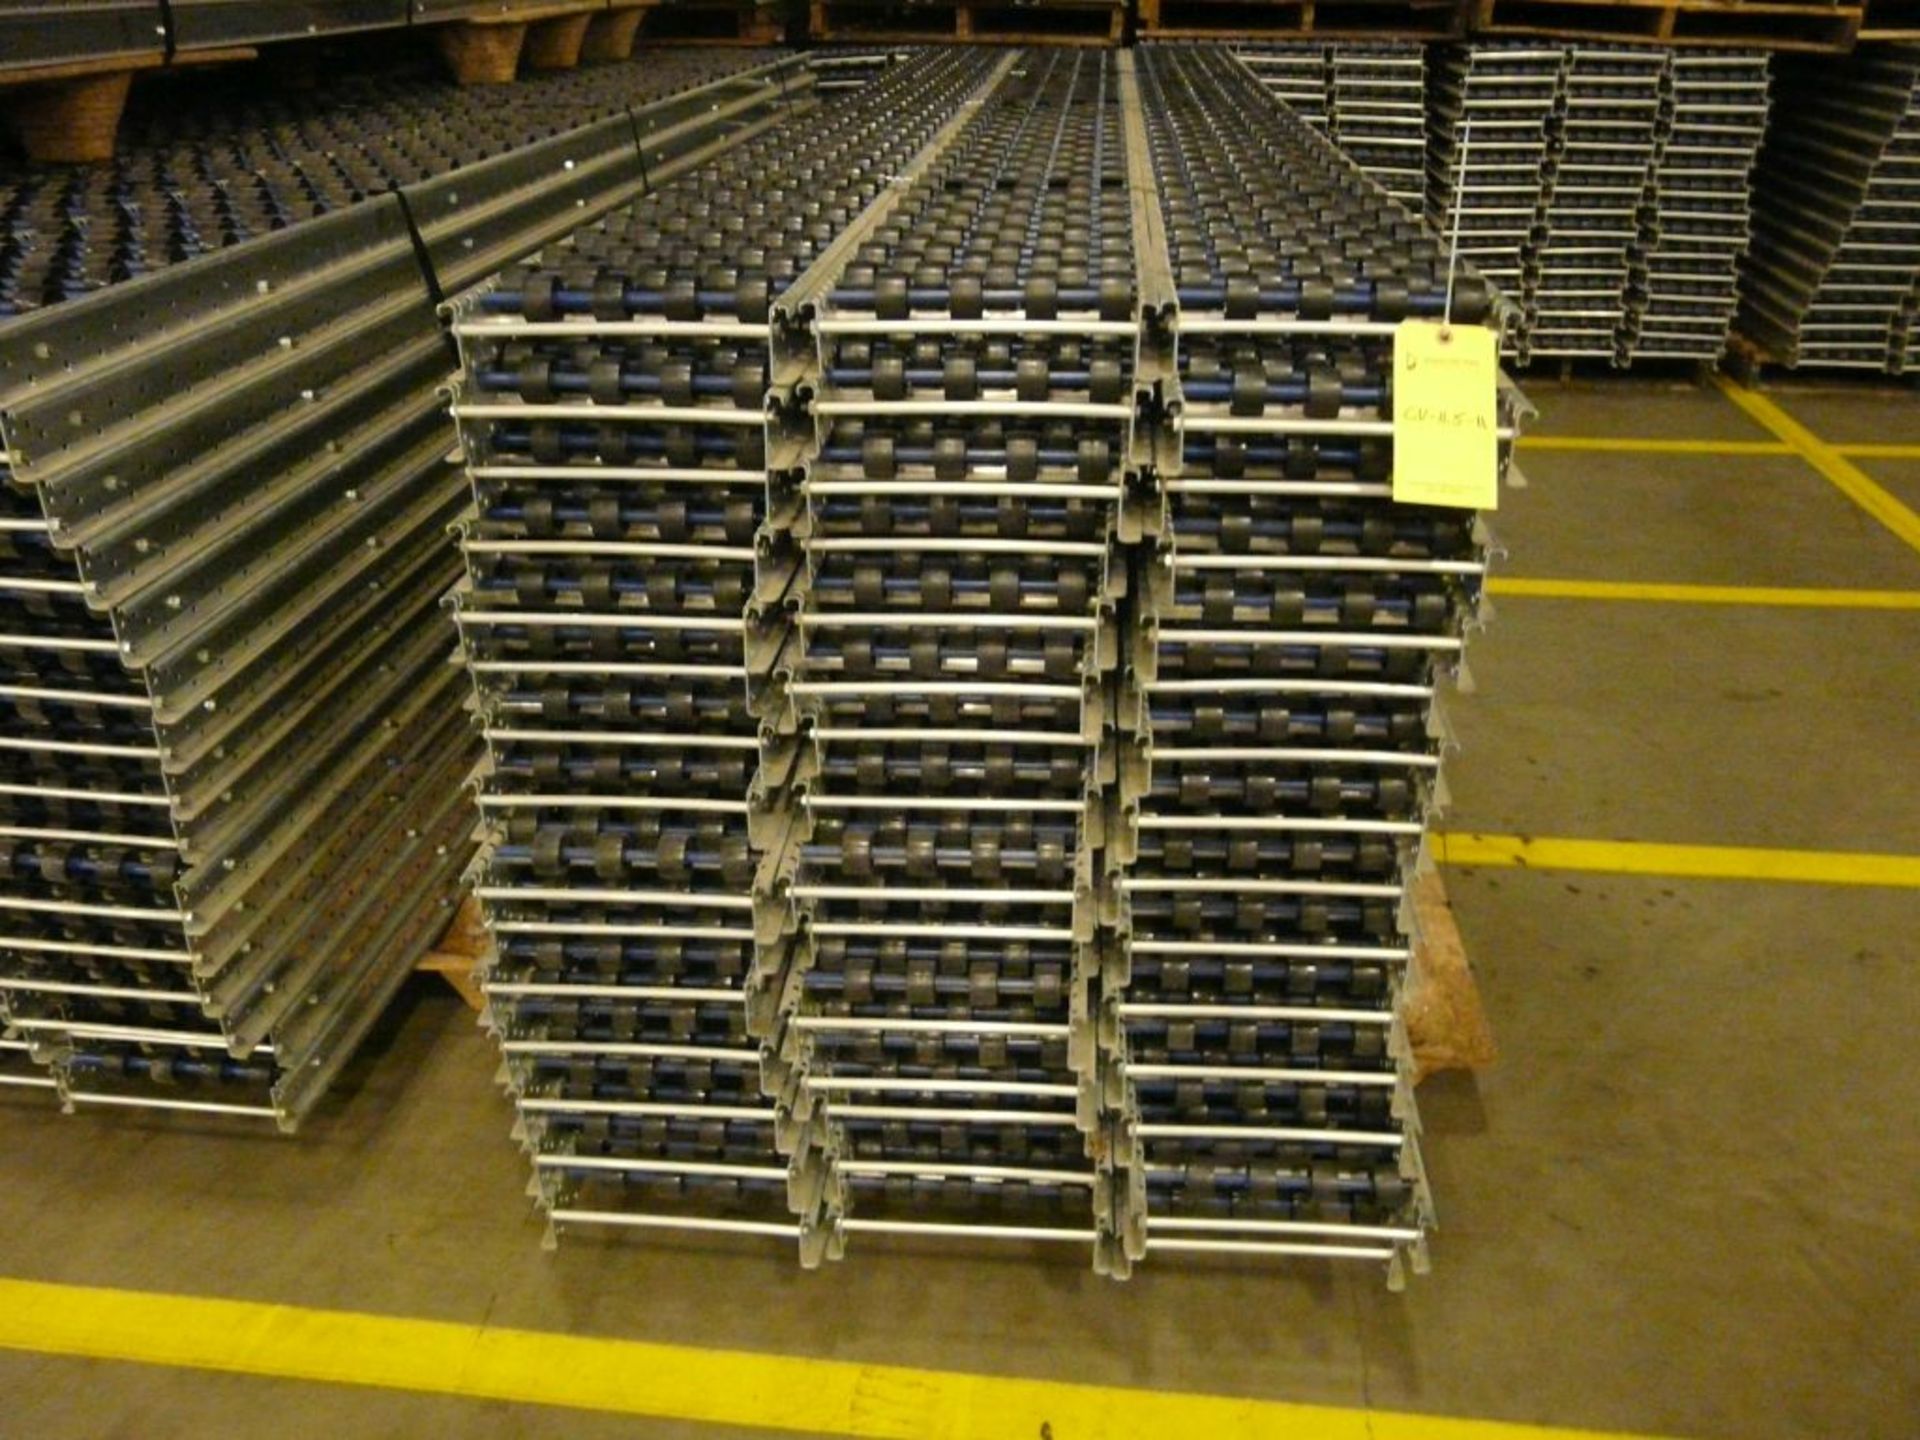 Lot of (90) SpanTrack Wheelbed Carton Flow Conveyors - 11.5'L x 11"W; Tag: 223594 - $30 Lot - Image 2 of 4